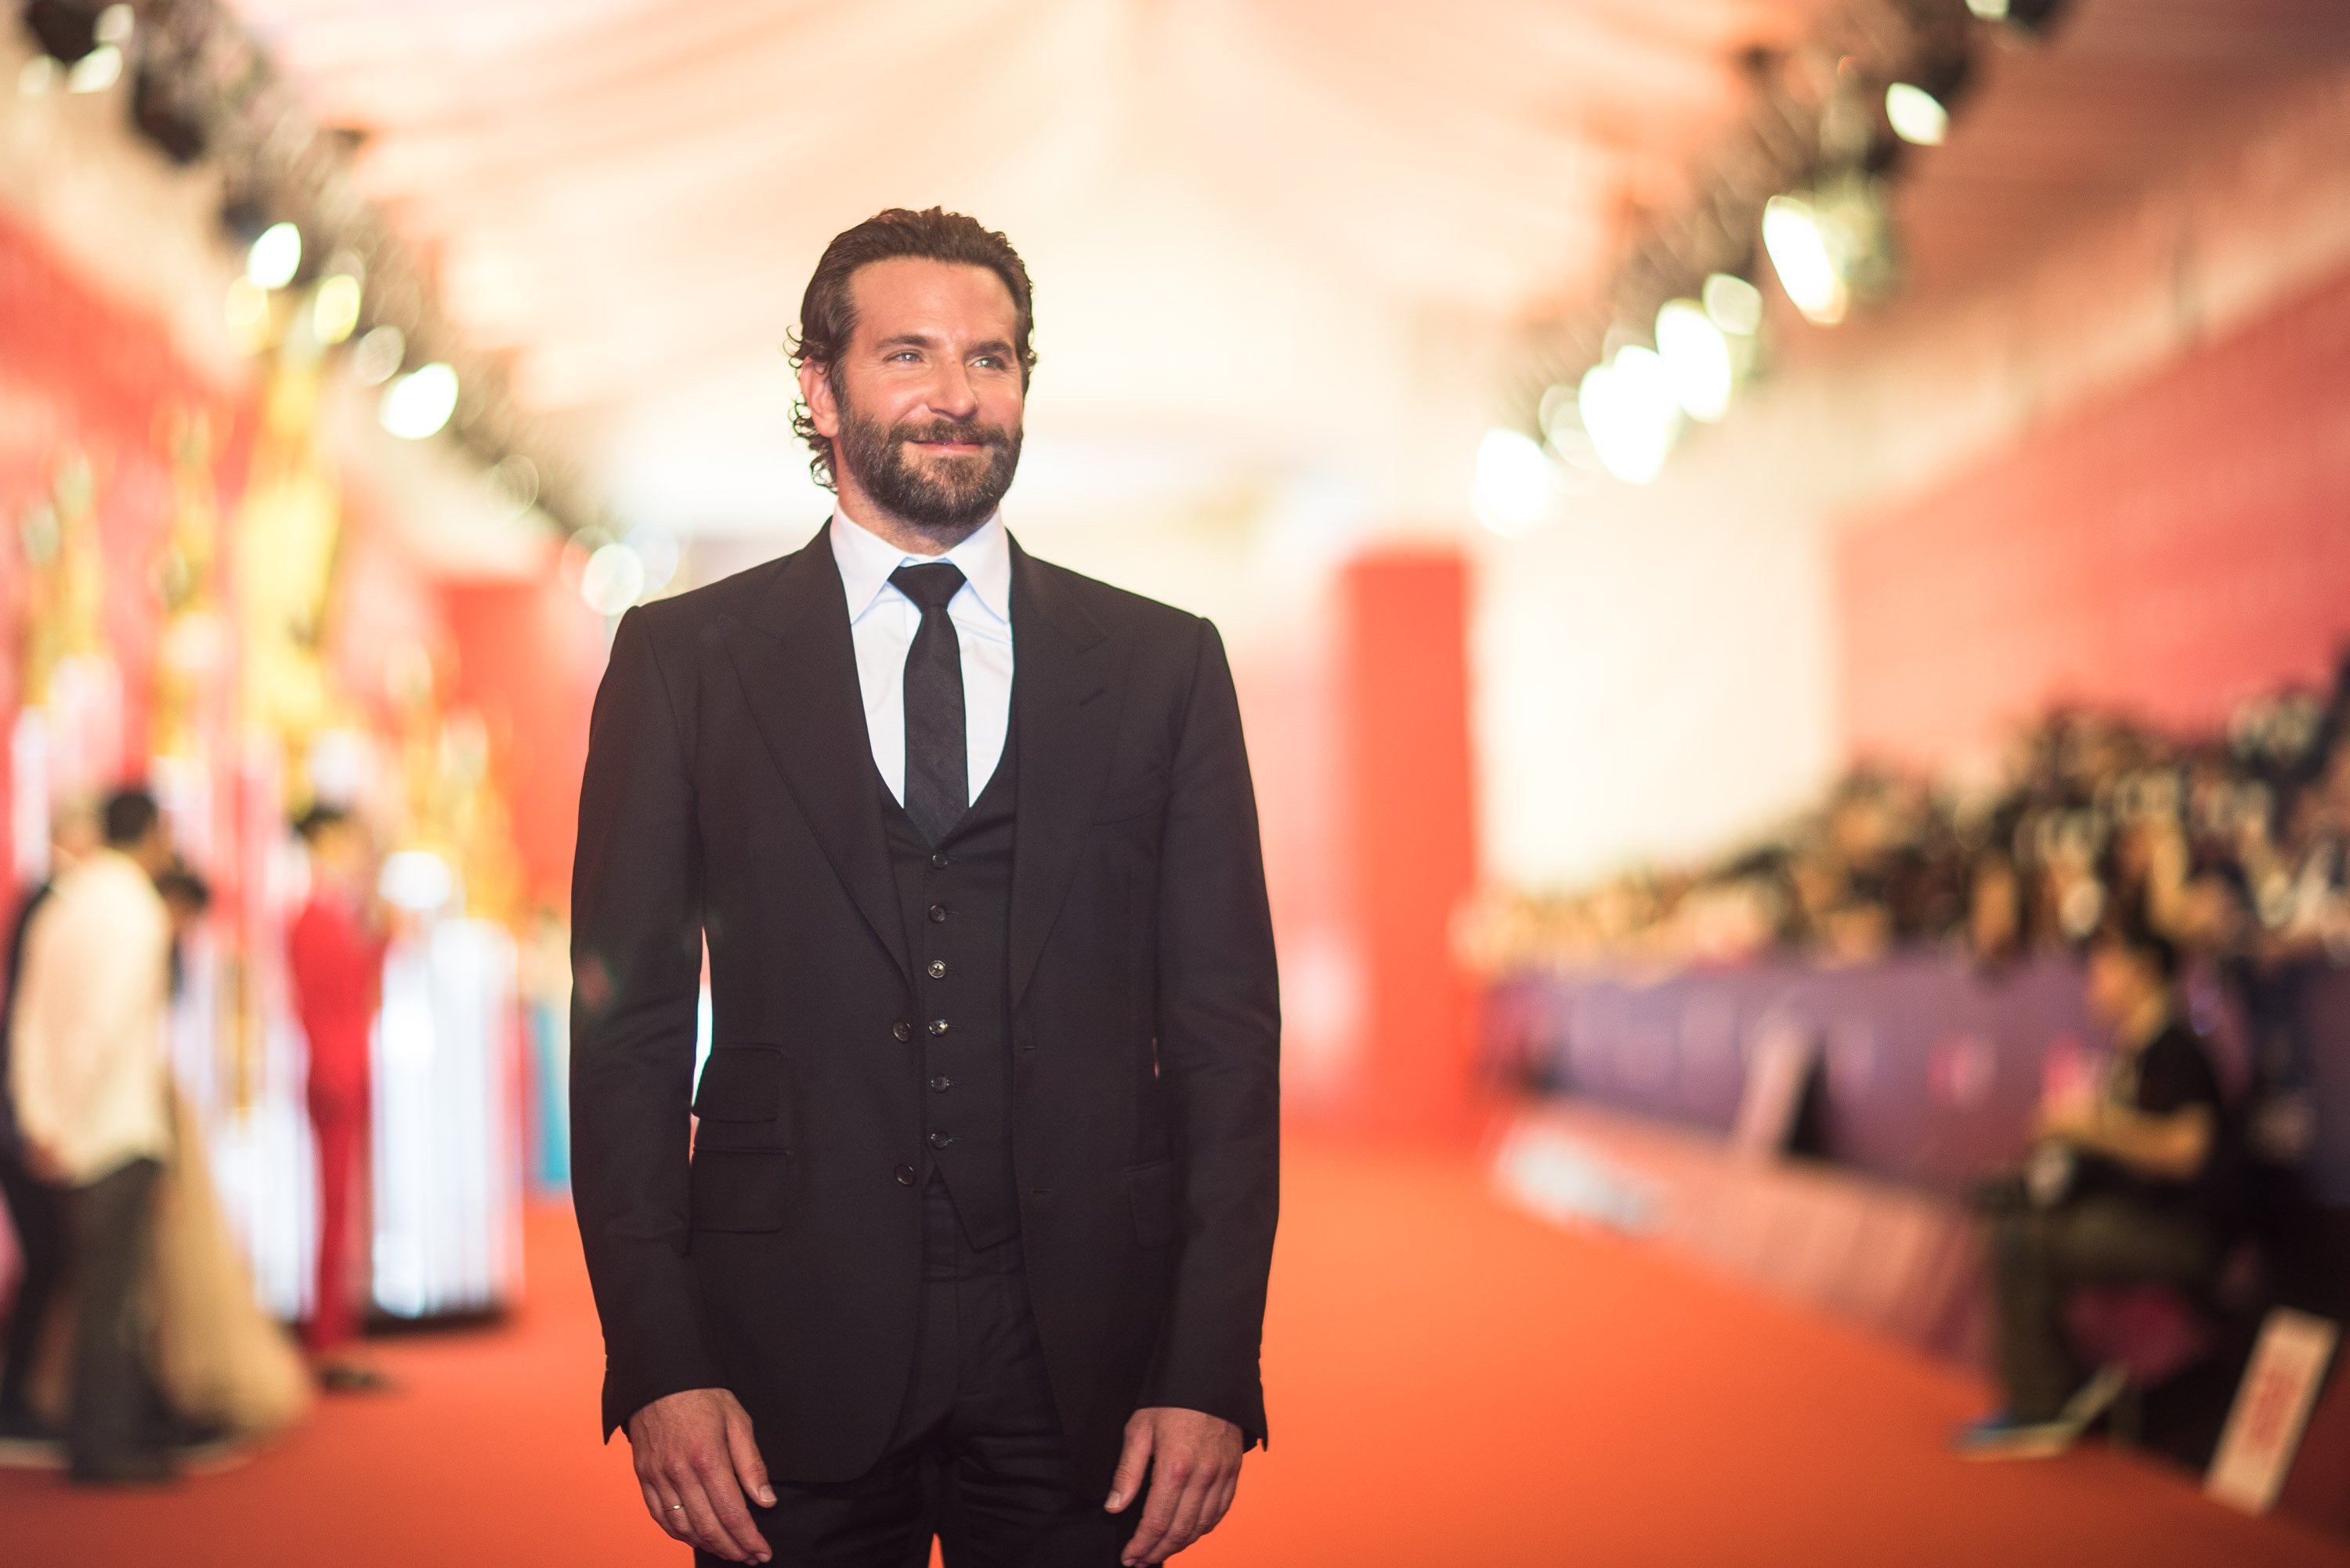 Bradley Cooper, actor | Photo: Getty Images